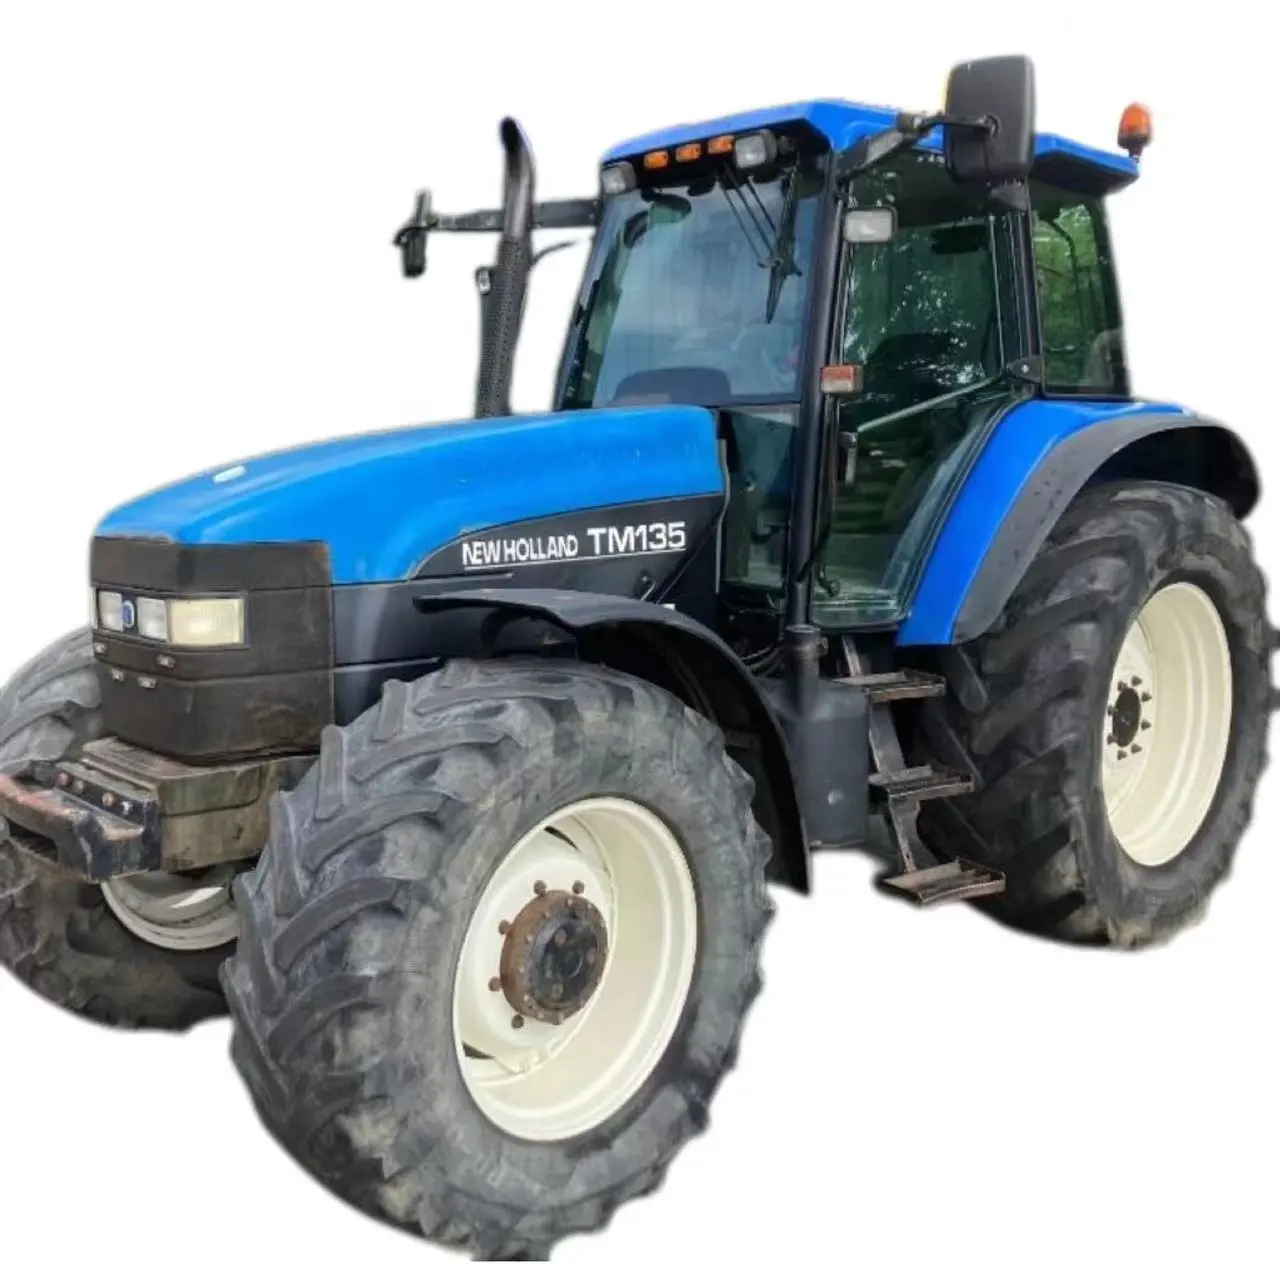 Used TM135 second hand tractor for sale popular in South America and Africa market